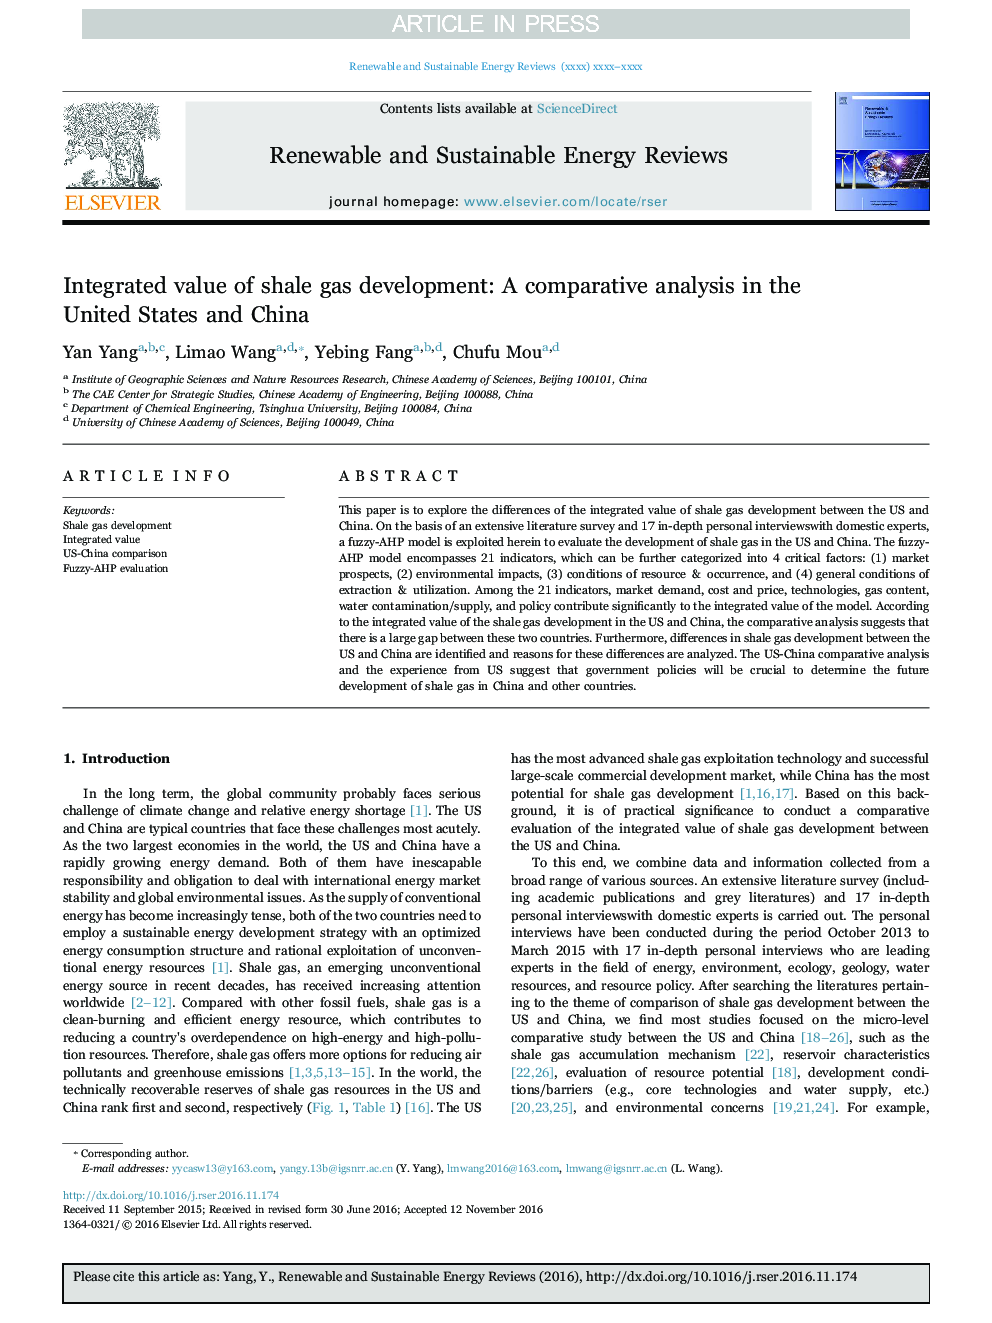 Integrated value of shale gas development: A comparative analysis in the United States and China